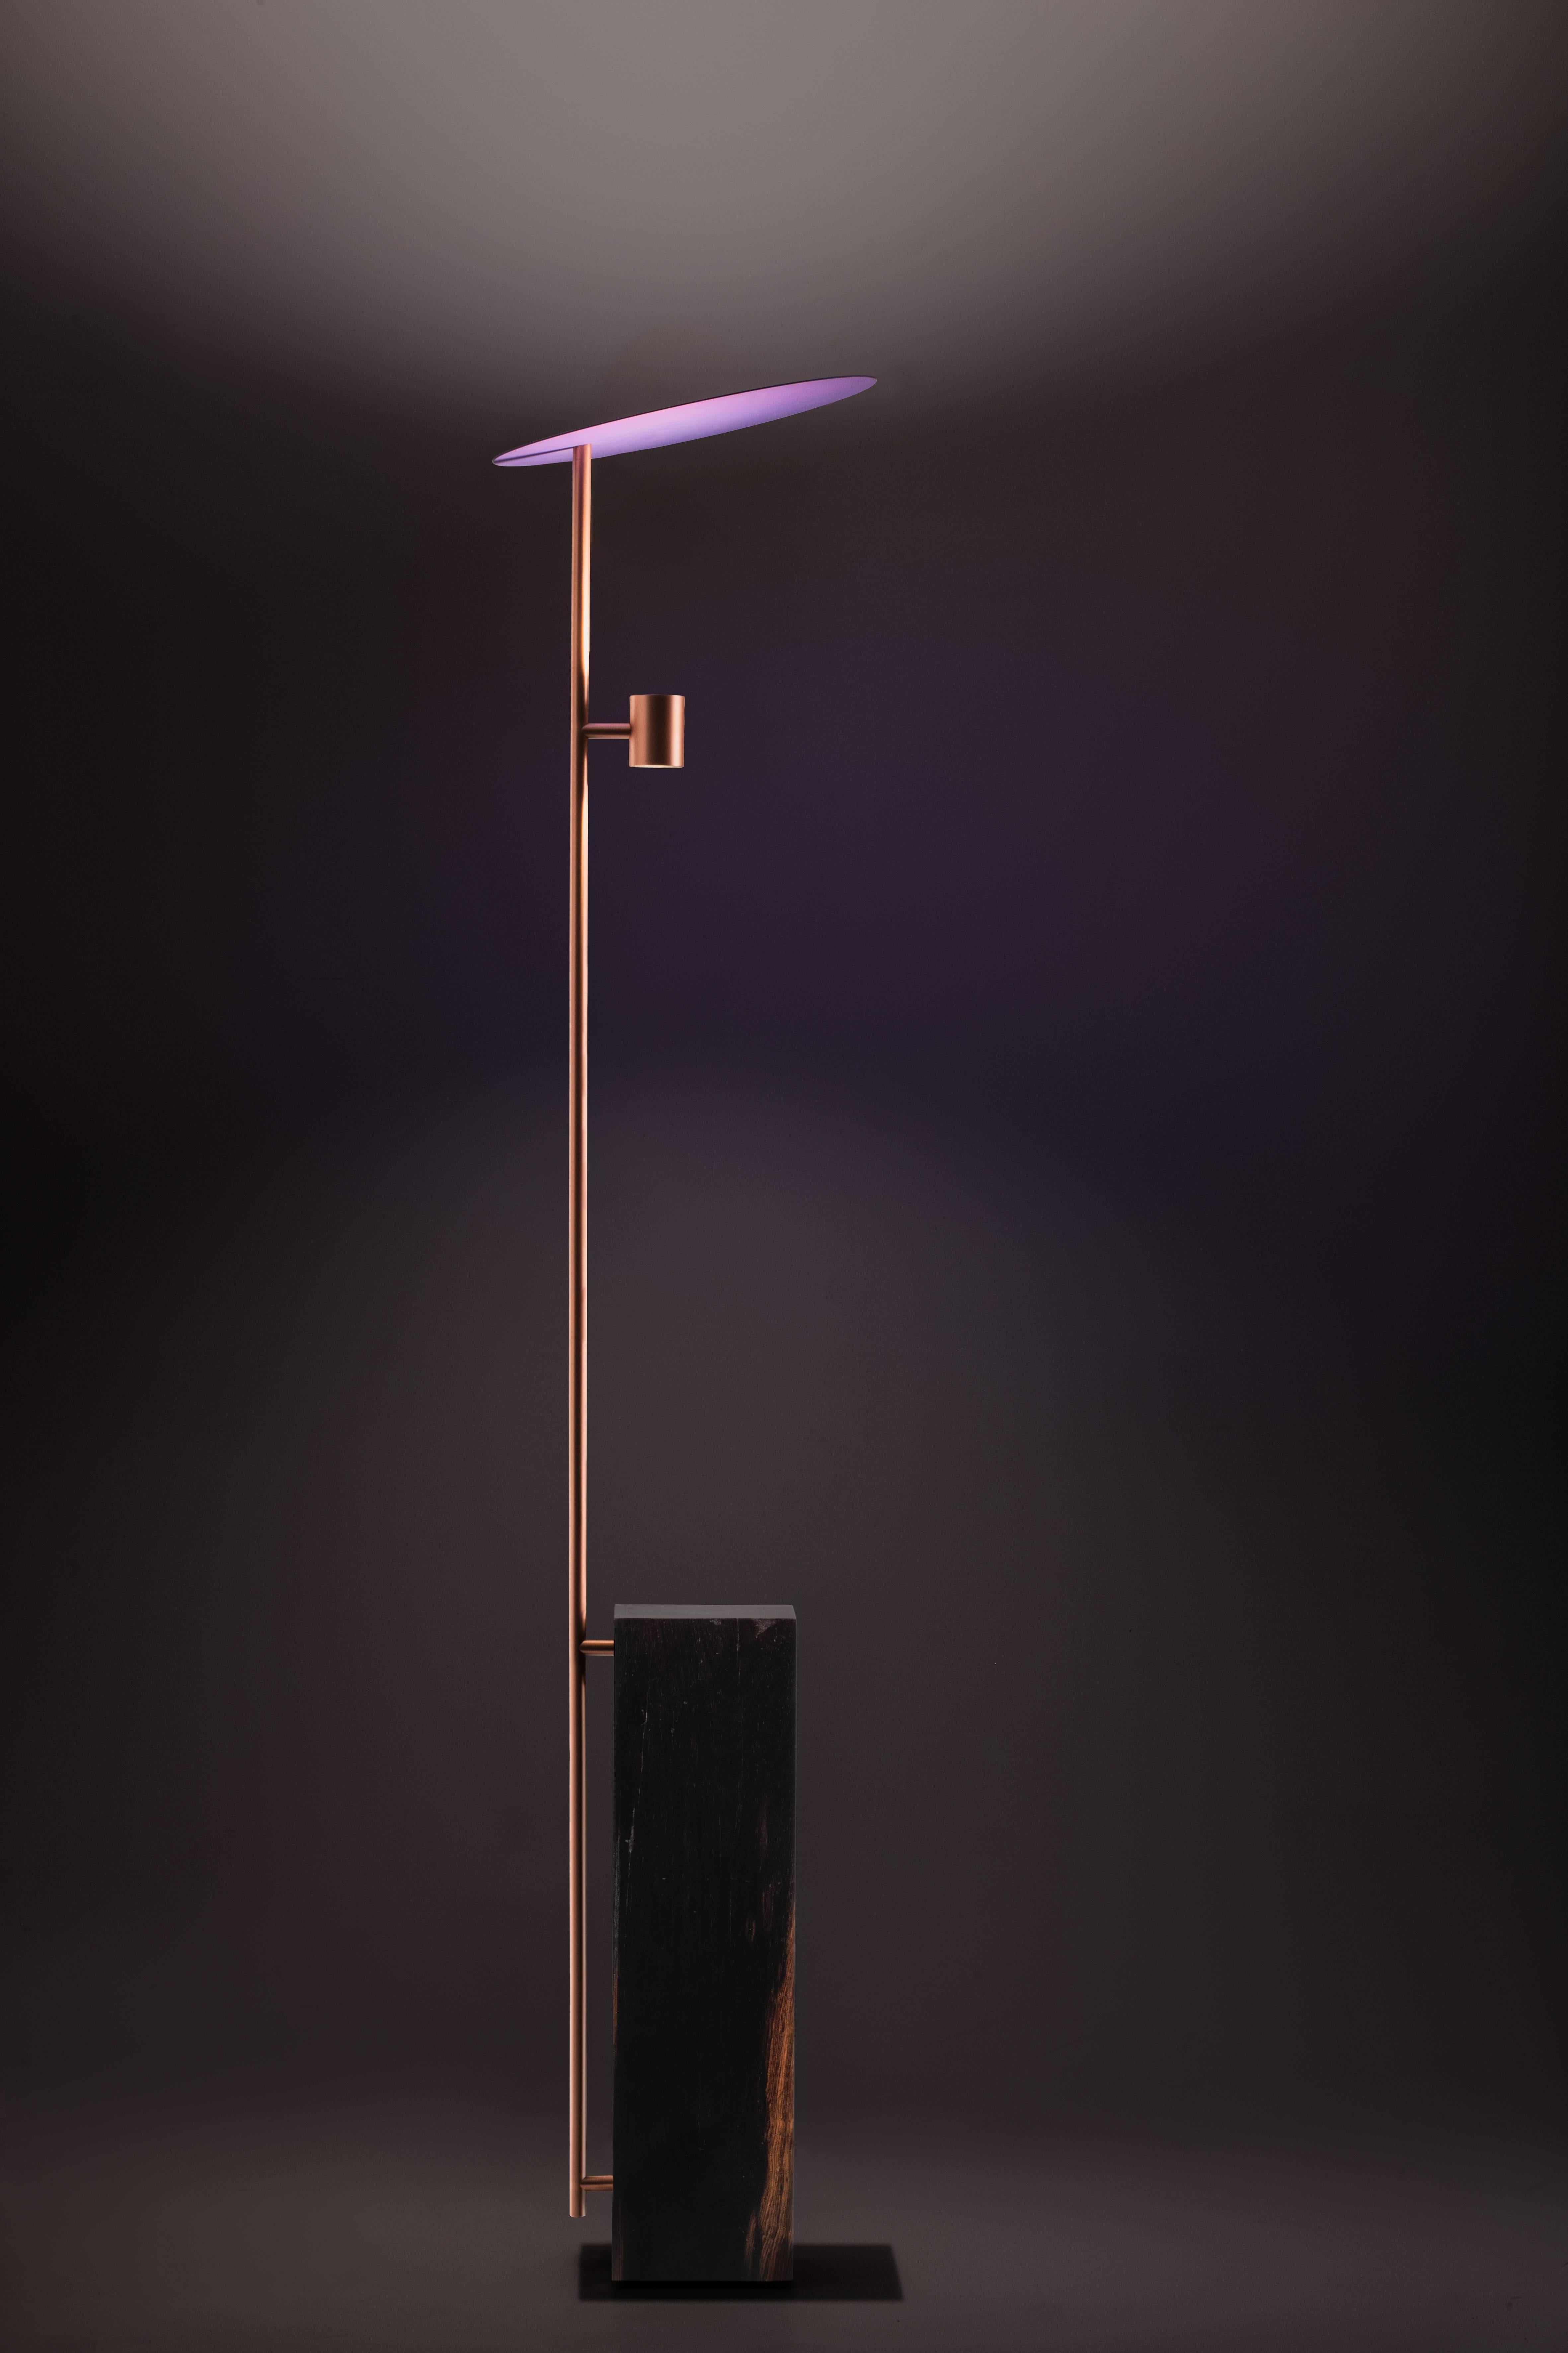 Limited edition 2 of 25

Floor lamp is made with a reclaimed wooden base, brushed copper stem, purple niobium reflector, led 8.4W 200k bulb.

Measurement Ø 14